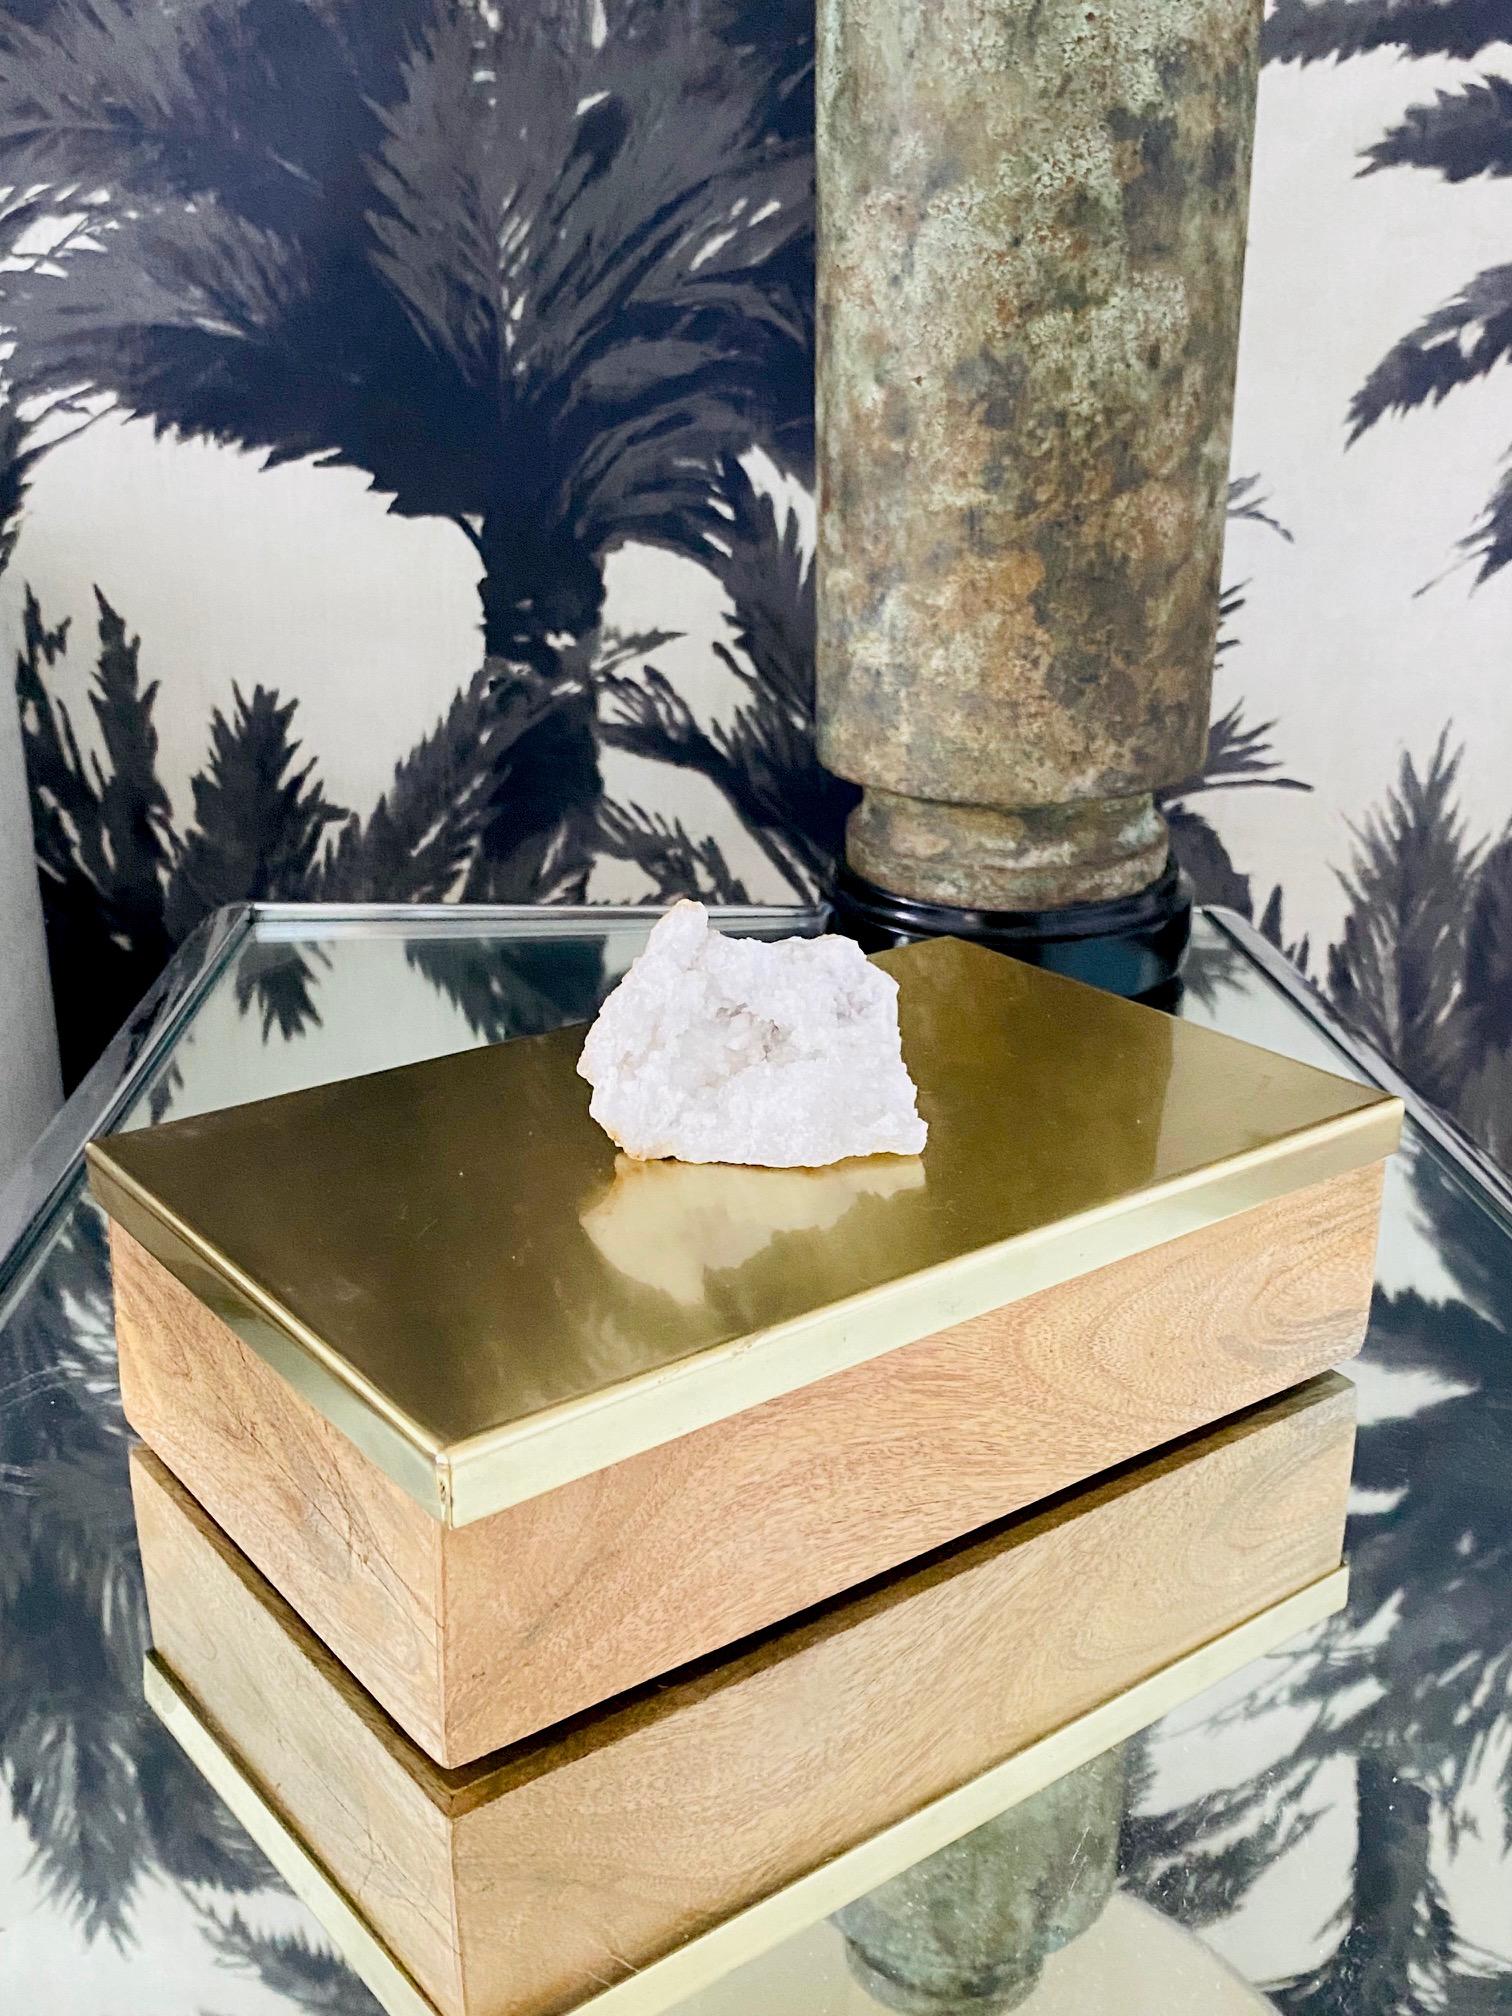 Vintage Hollywood Regency style decorative box in white oakwood with a satin brass metal lid. The box features a large white quartz crystal stone accent. The hinged lid opens to reveal a large interior for convenient storage. Makes a chic desk top